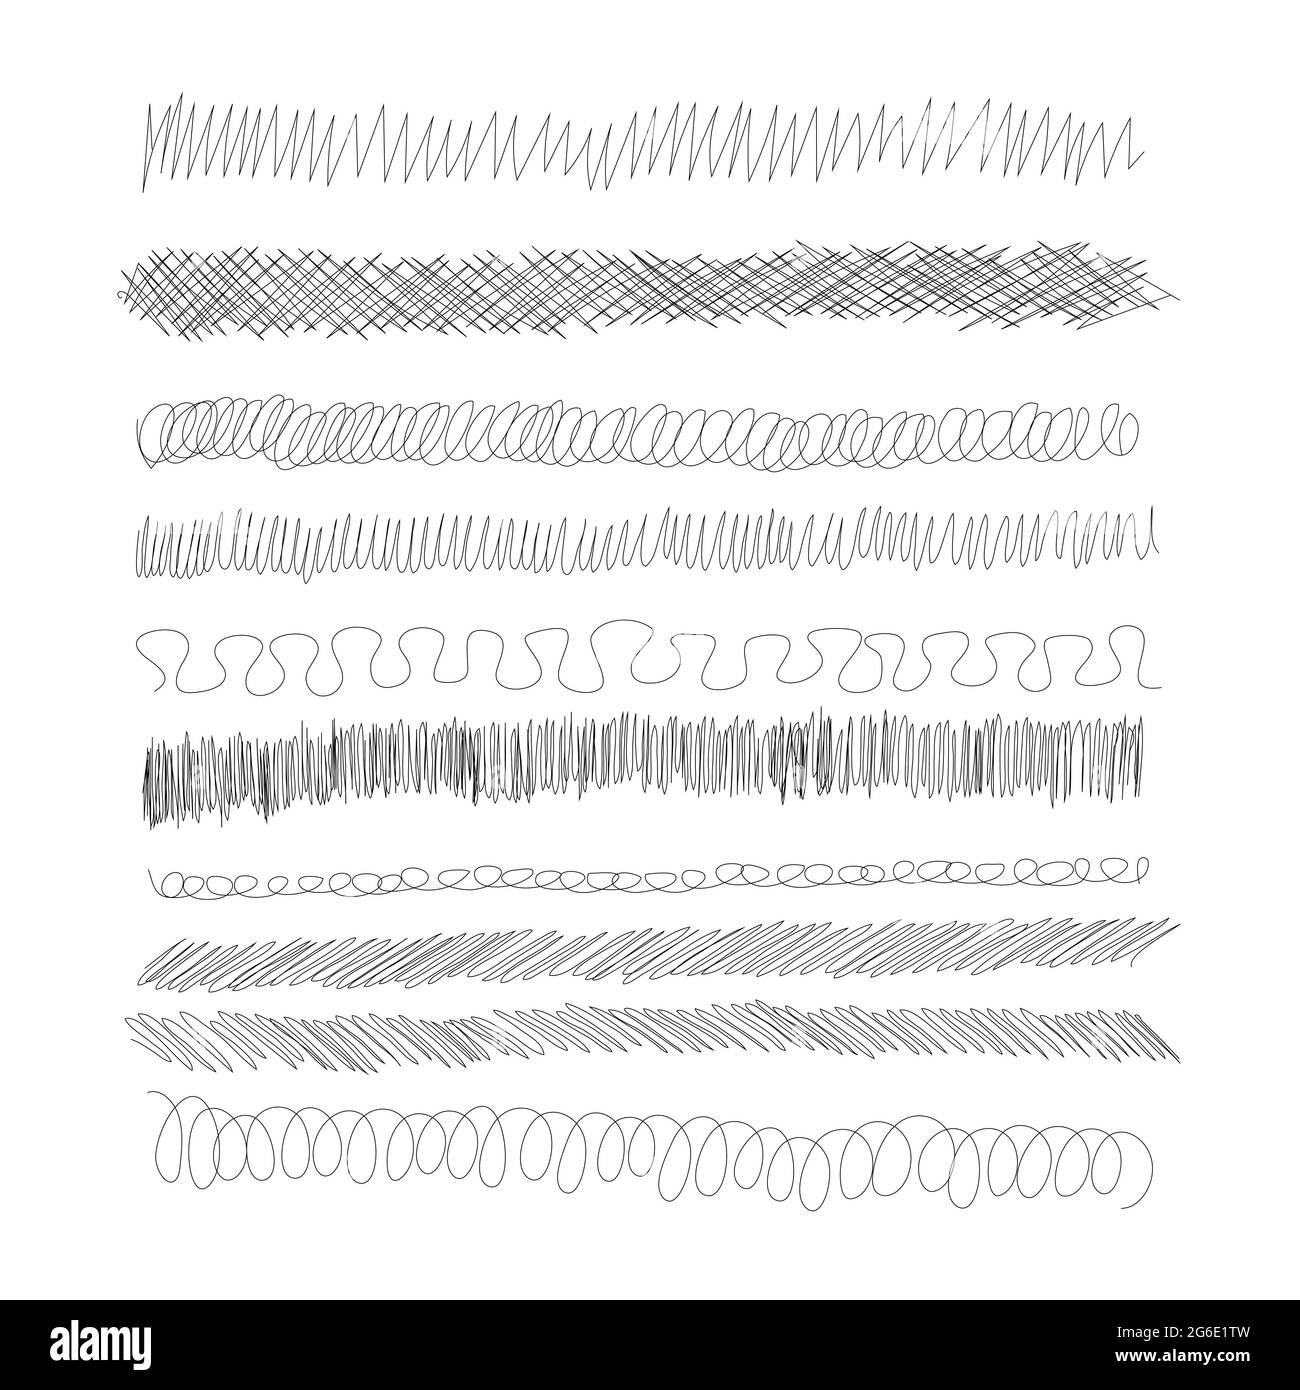 Ink pen scrawl borders collection - various rows of hand drawn scribble line drawings. Stock Vector